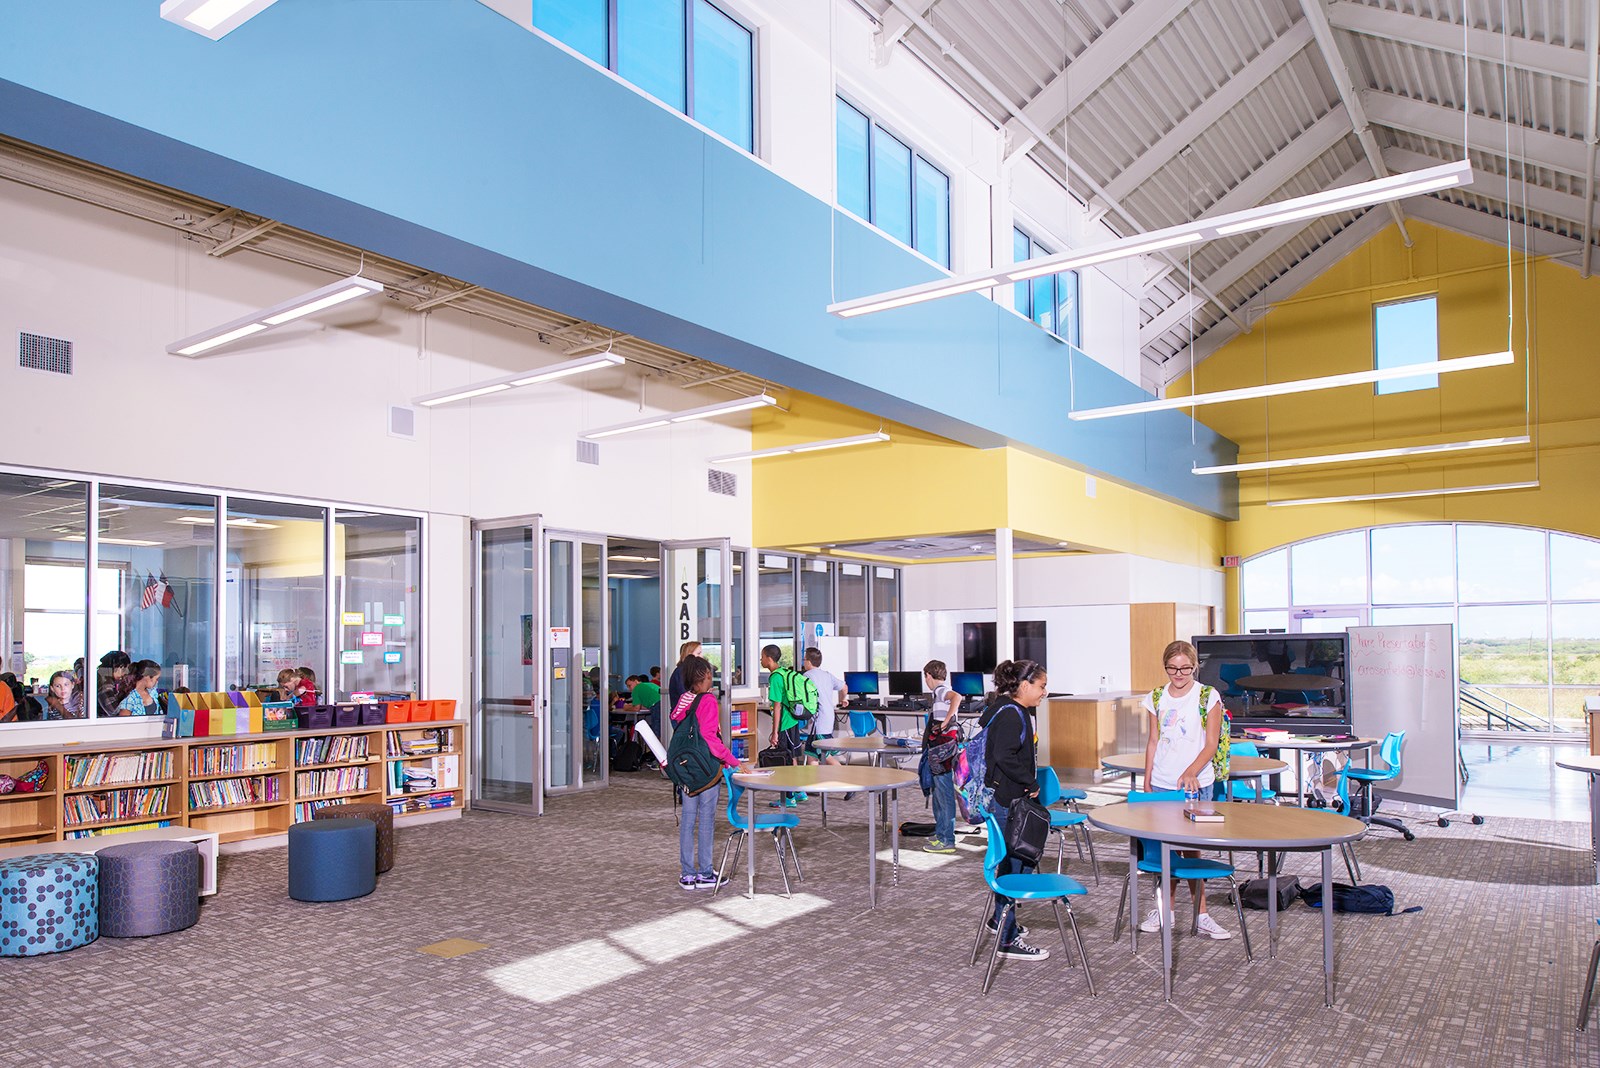 Core Considerations for Early Childhood Classroom Design